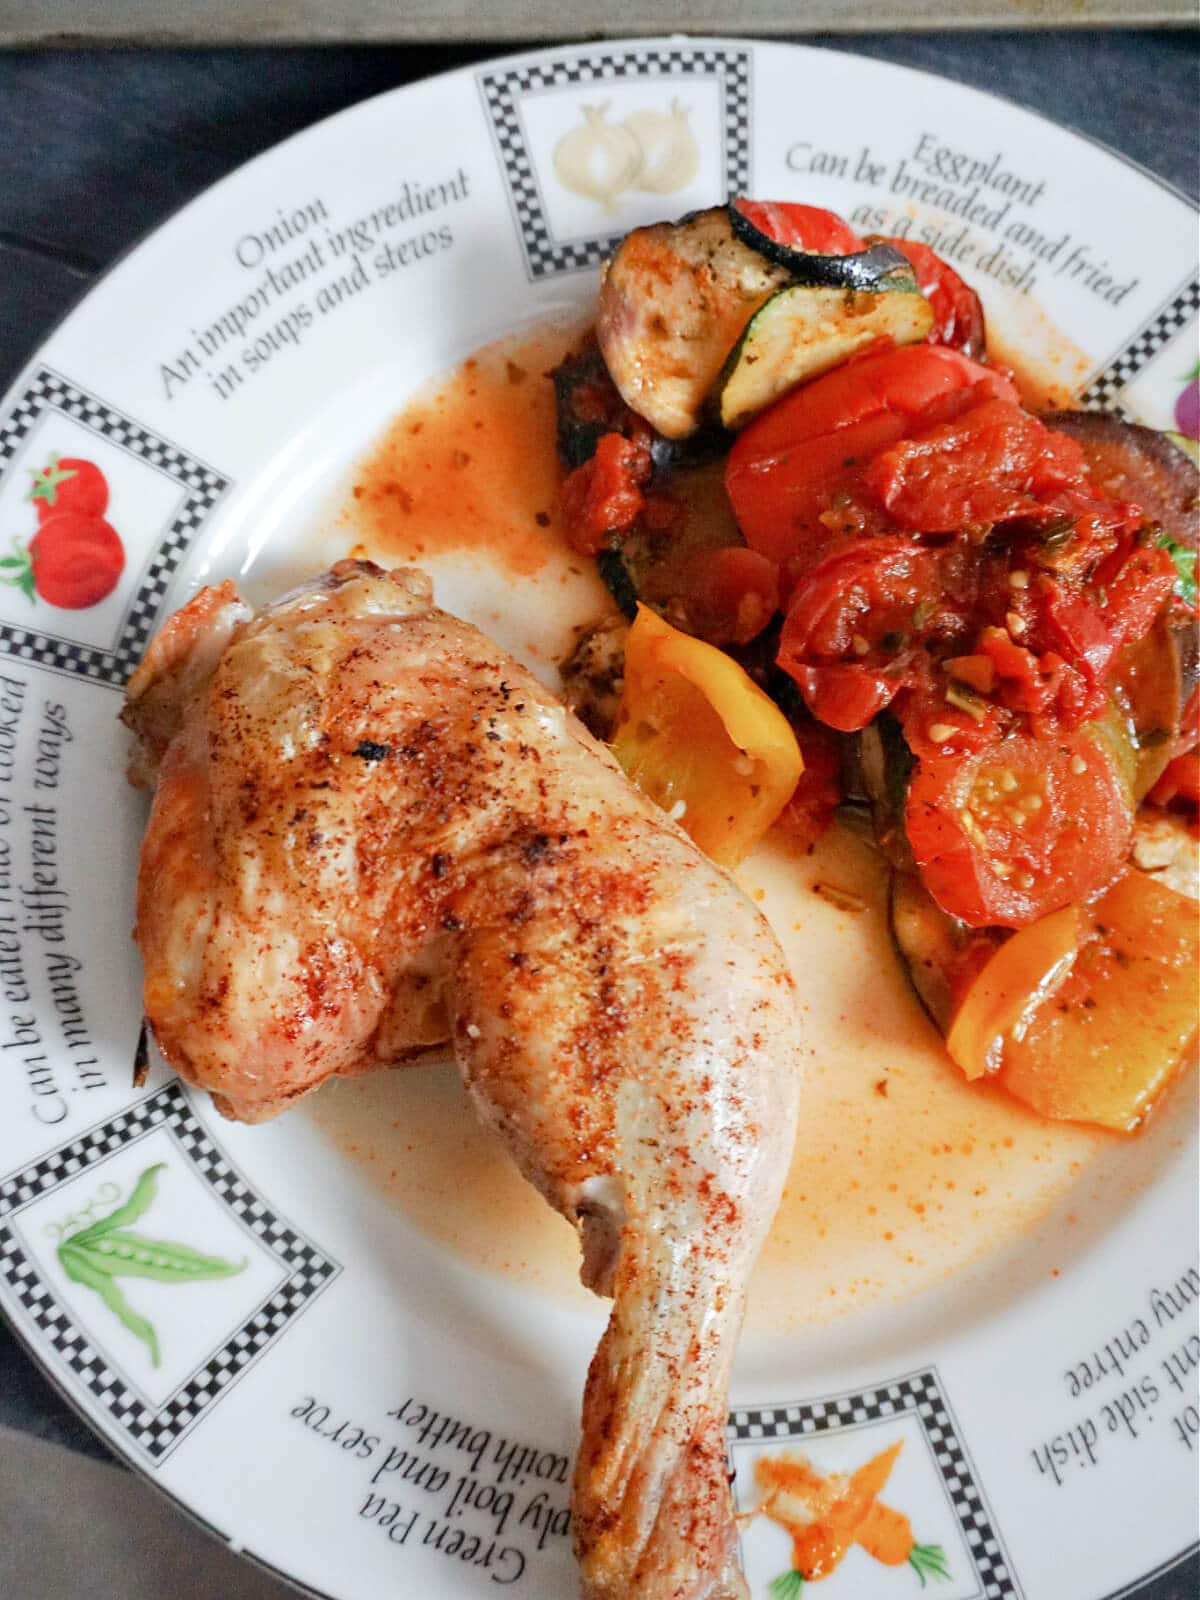 Overhead shot of a plate with a roasted chicken leg and ratatouille.